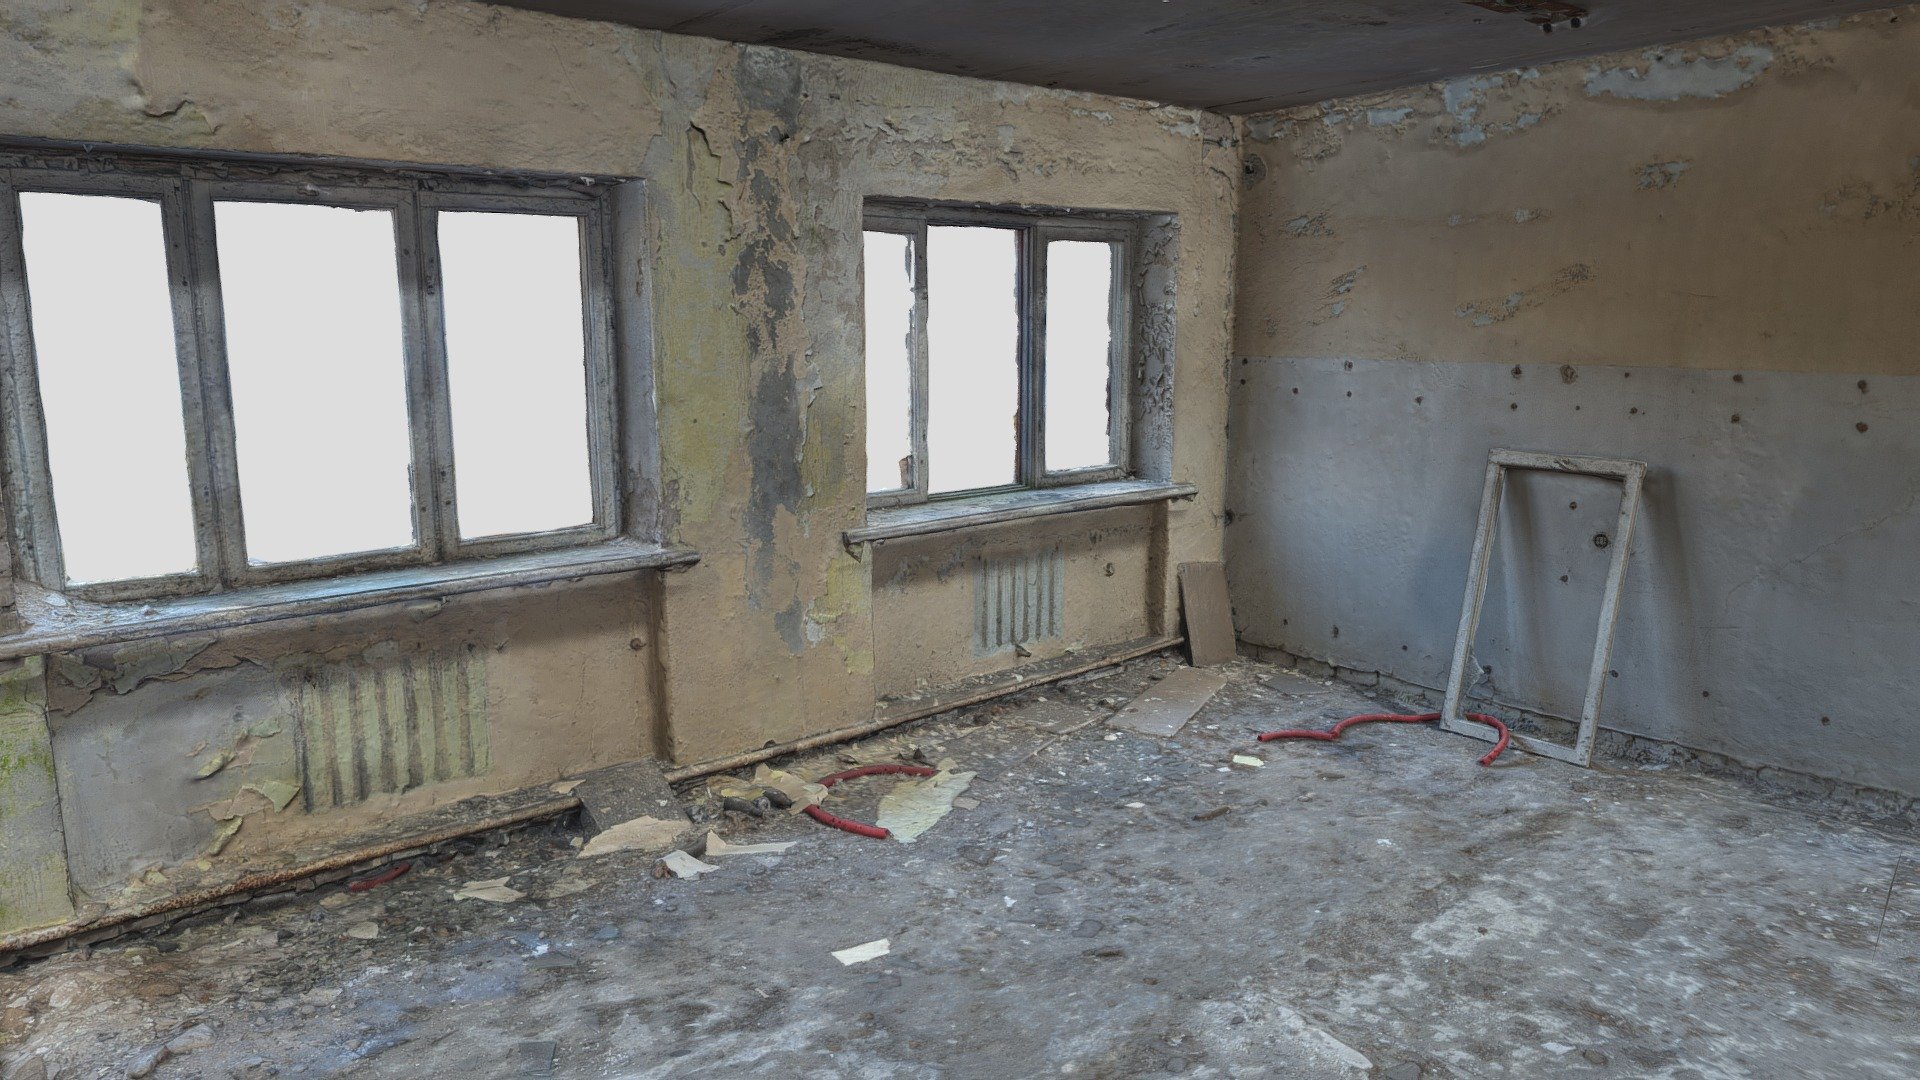 3D scan of a room found in an abandoned soviet factory.
Wooden window frame on the ground. 
With normal map 3d model